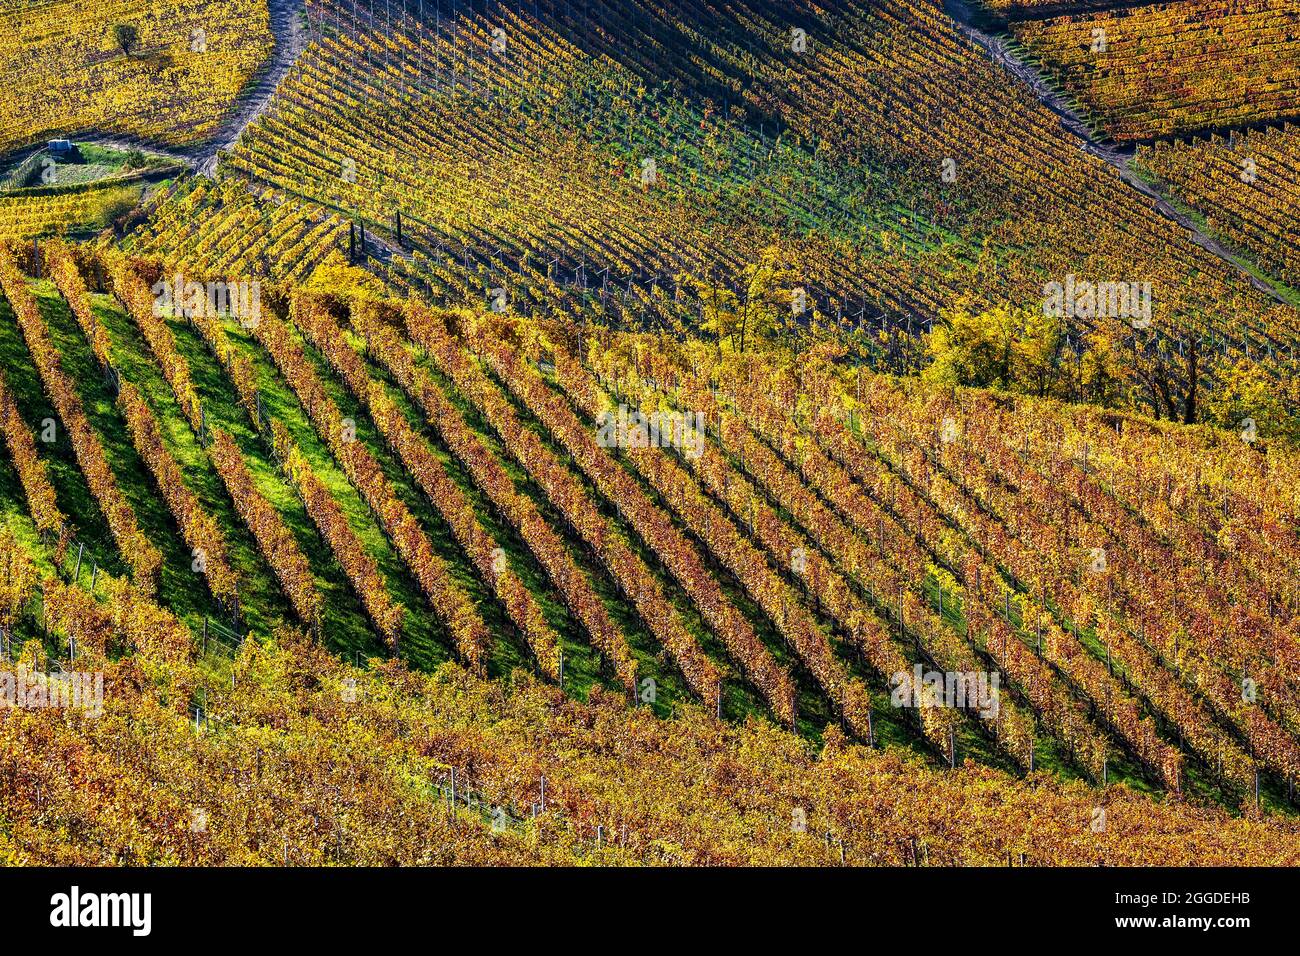 Rows of colorful autumnal vineyards on the hills of Langhe in Piedmont, Northern Italy. Stock Photo